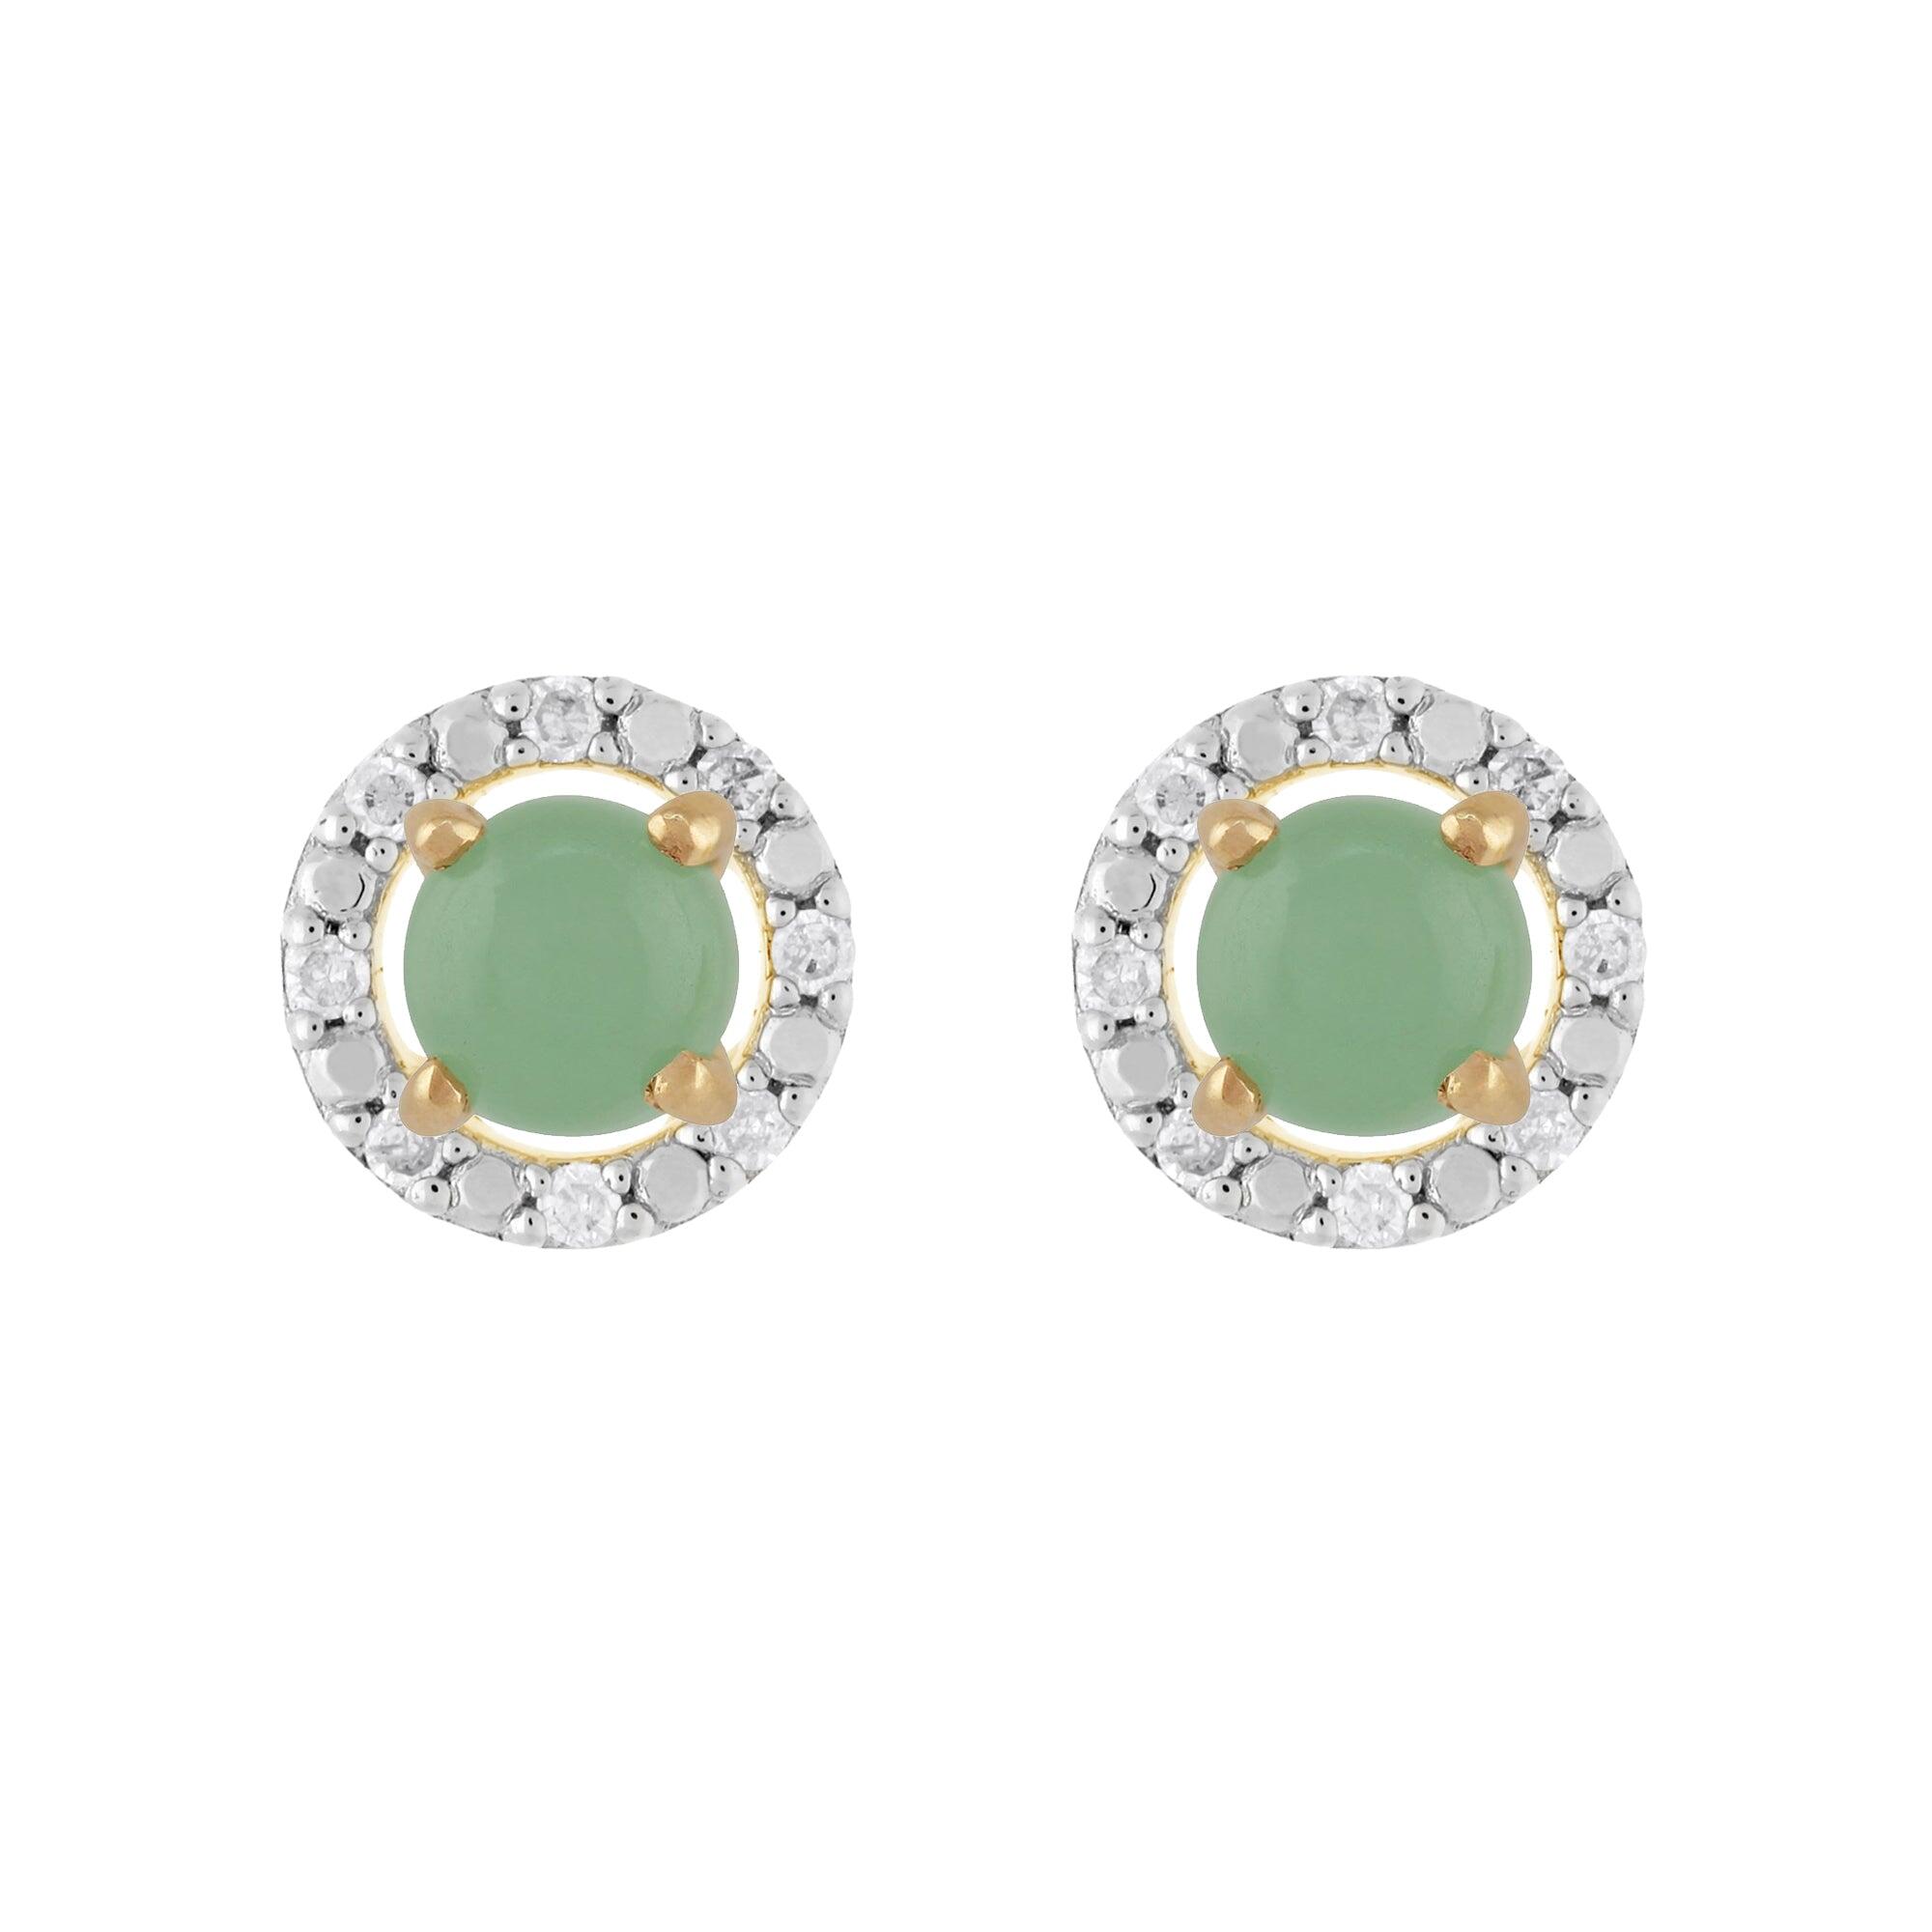 Classic Round Jade Stud Earrings with Detachable Diamond Round Earrings Jacket Set in 9ct Yellow Gold